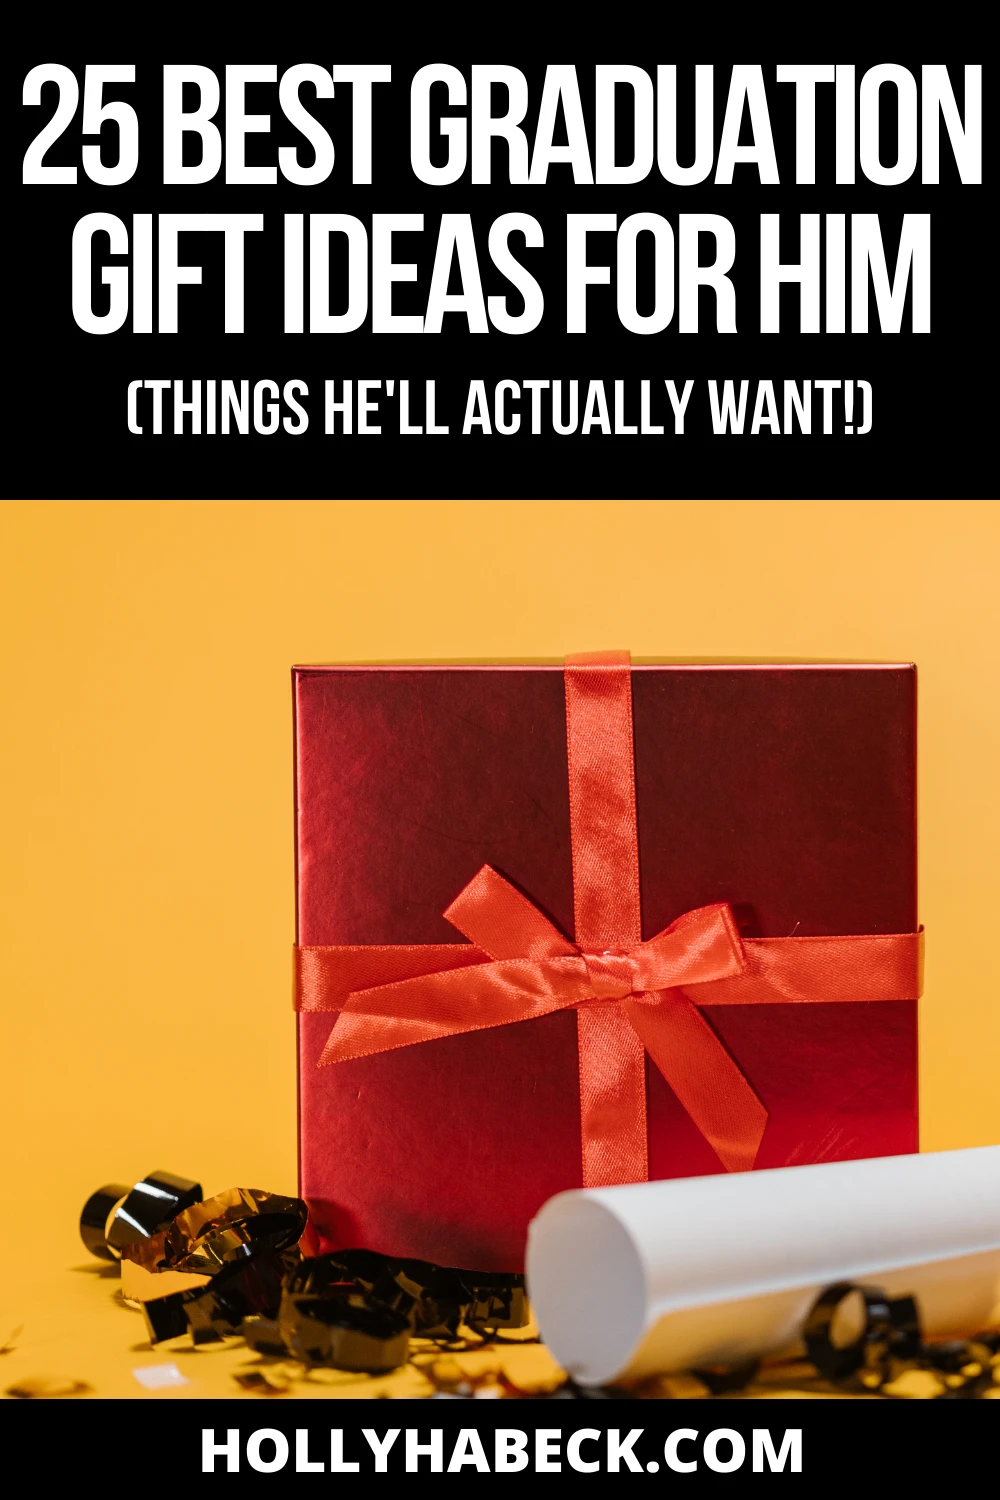 25 Best Graduation Gift Ideas for Him (Things He'll Actually Want!)